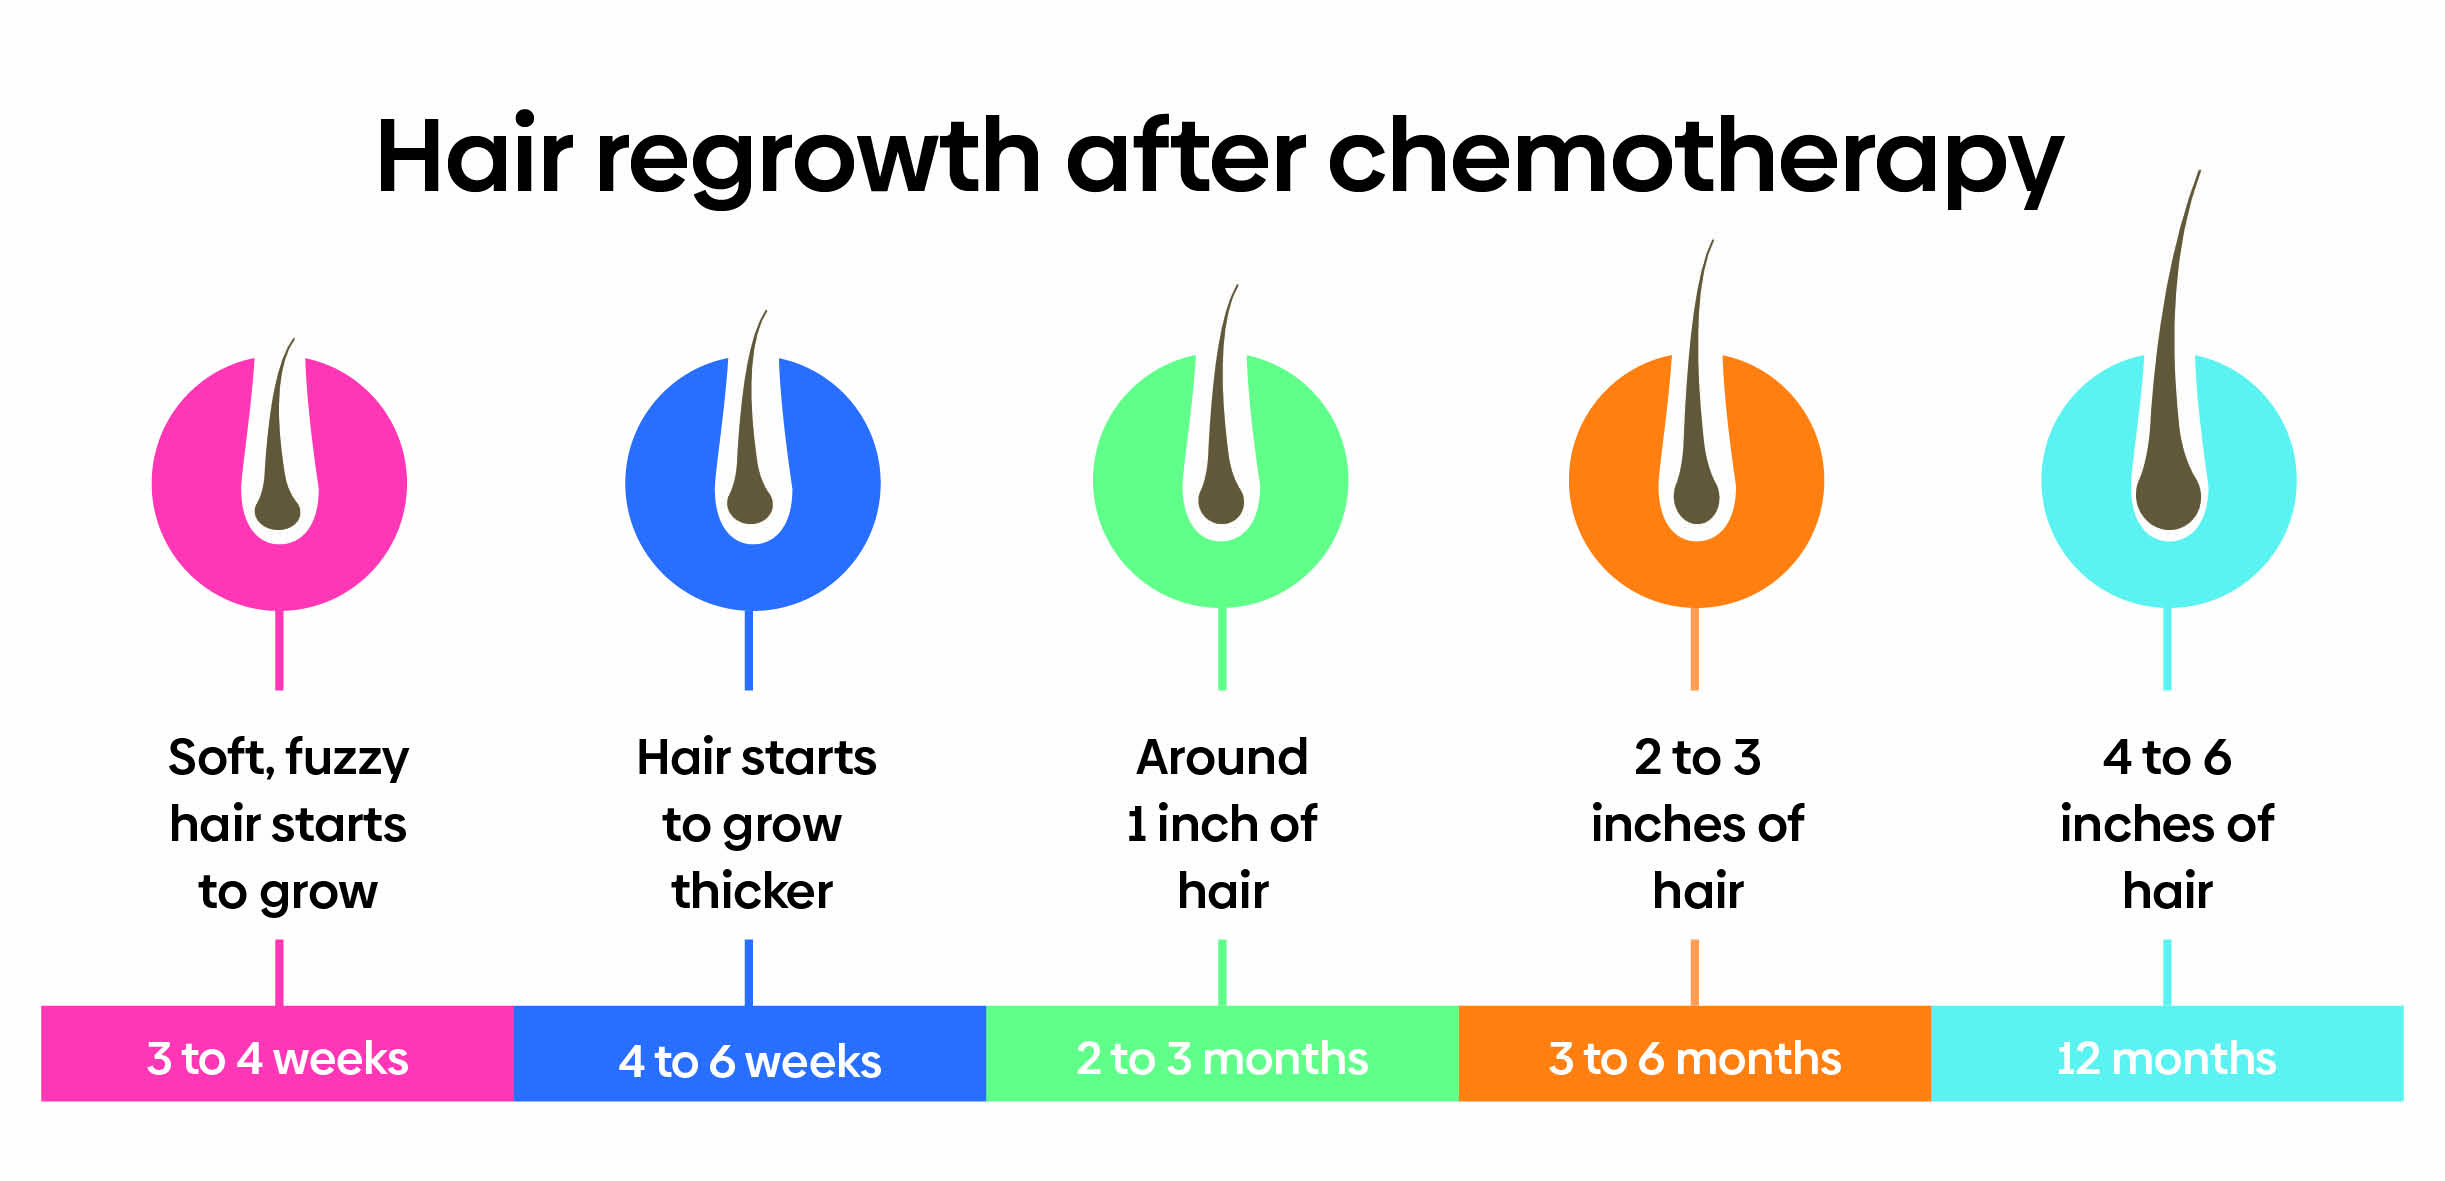 Hair regrowth after chemotherapy